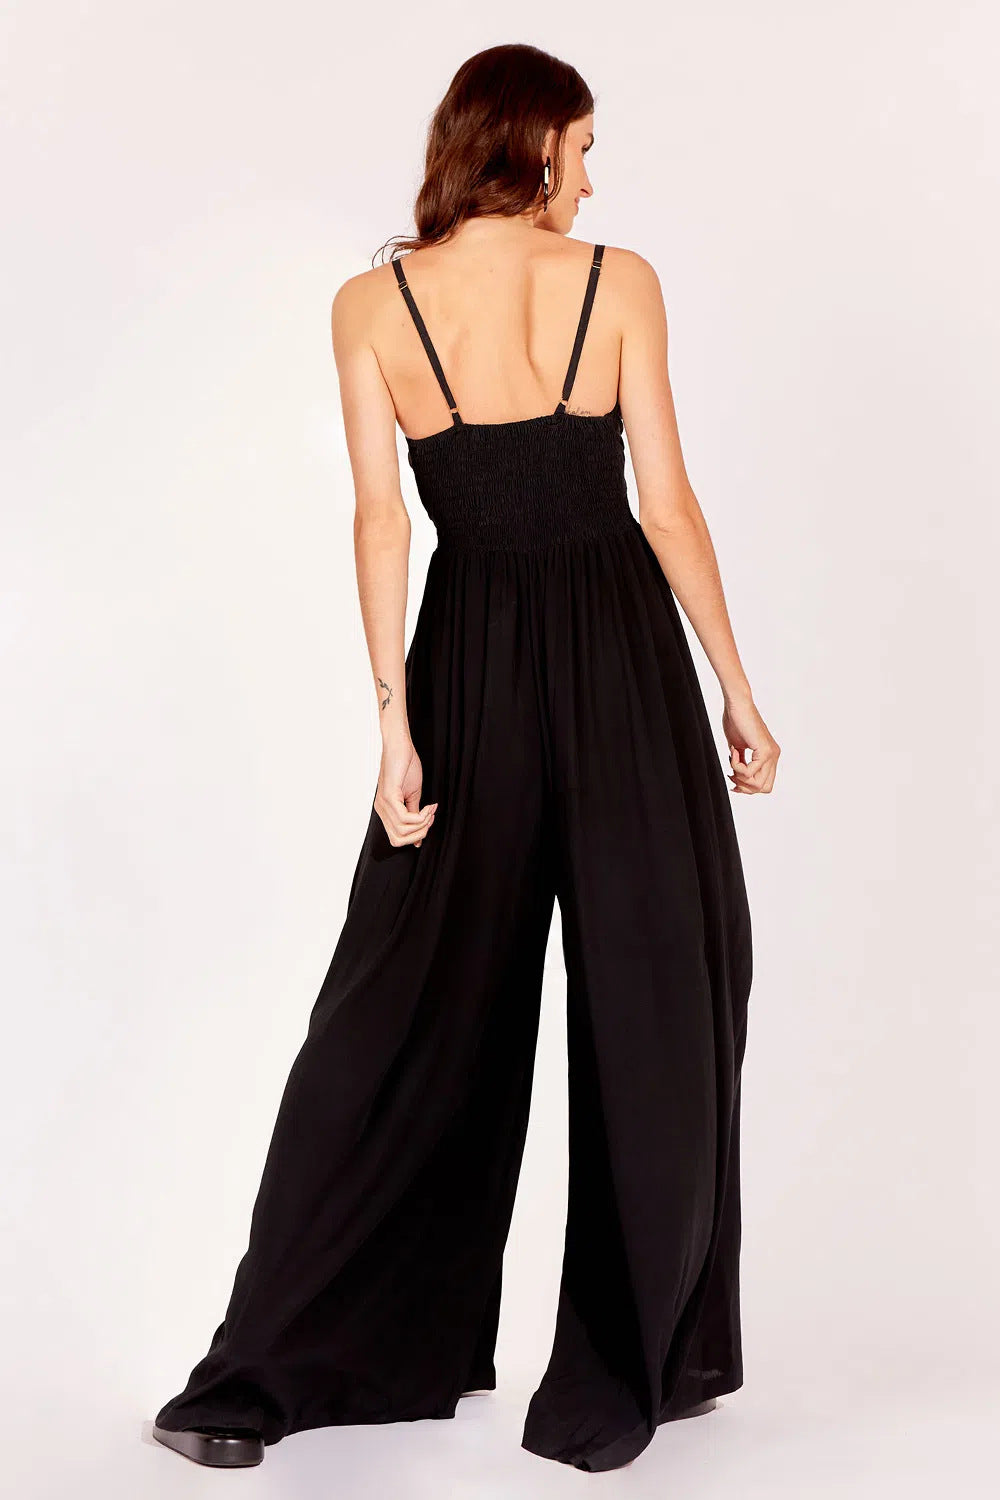 Summer Fashion Wide Legs Jumpsuits for Women-Jumpsuits & Rompers-Black-S-Free Shipping Leatheretro